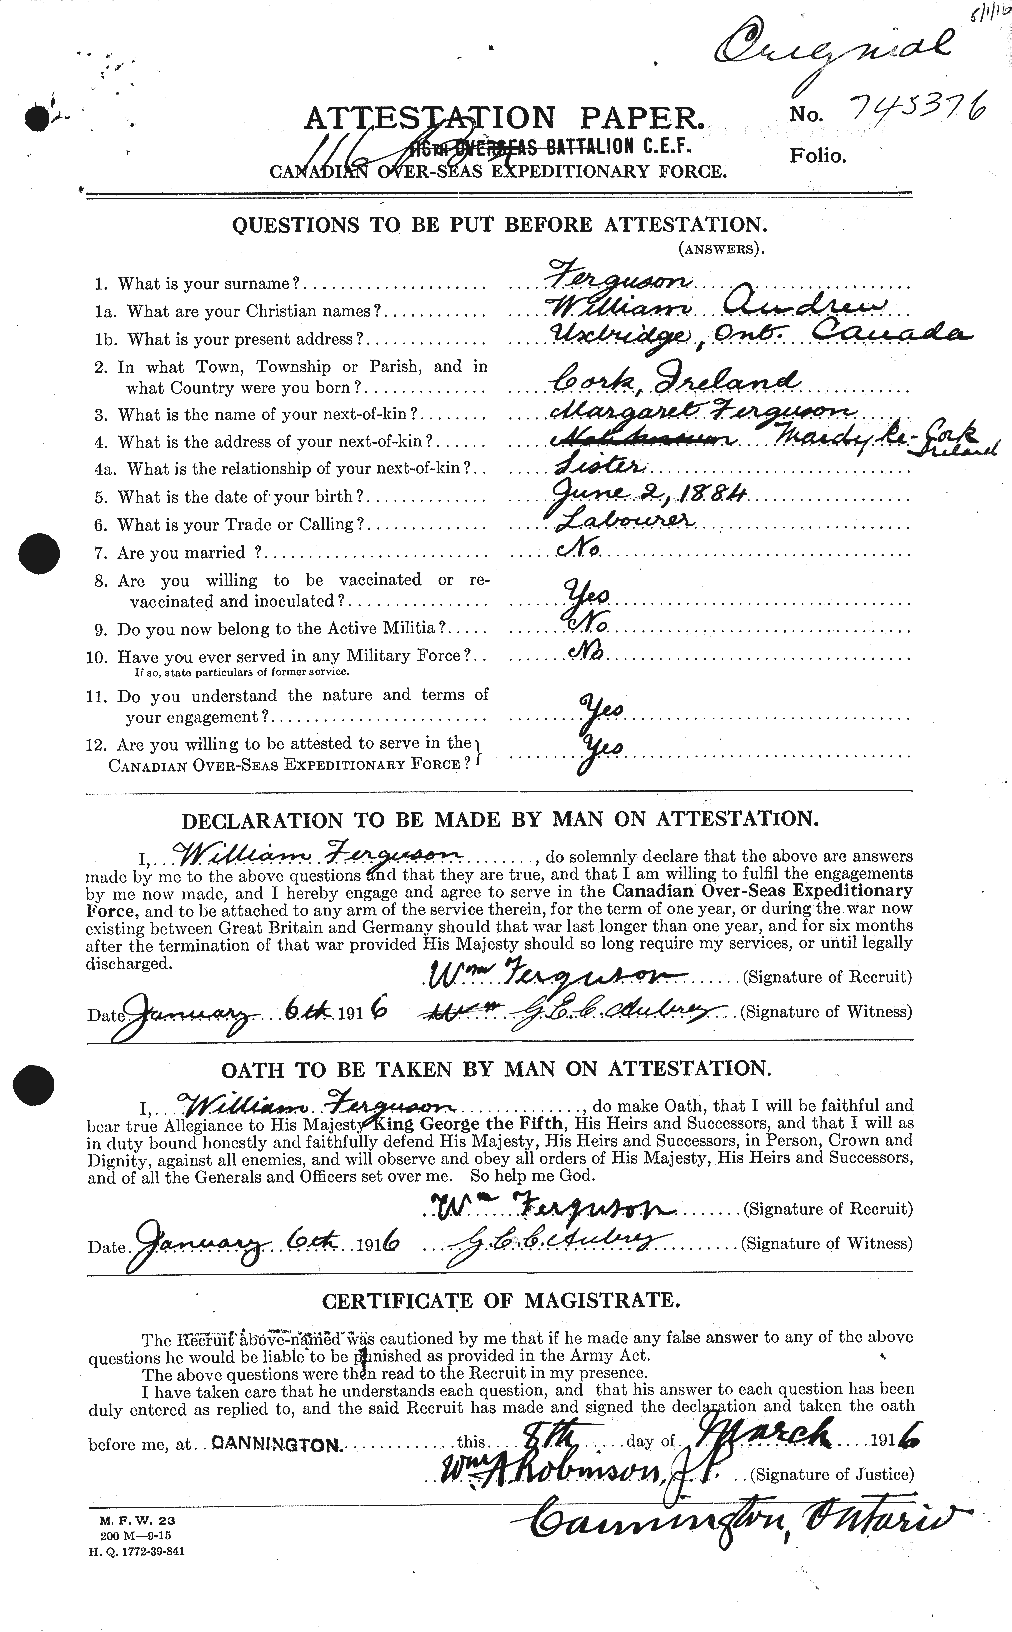 Personnel Records of the First World War - CEF 321750a